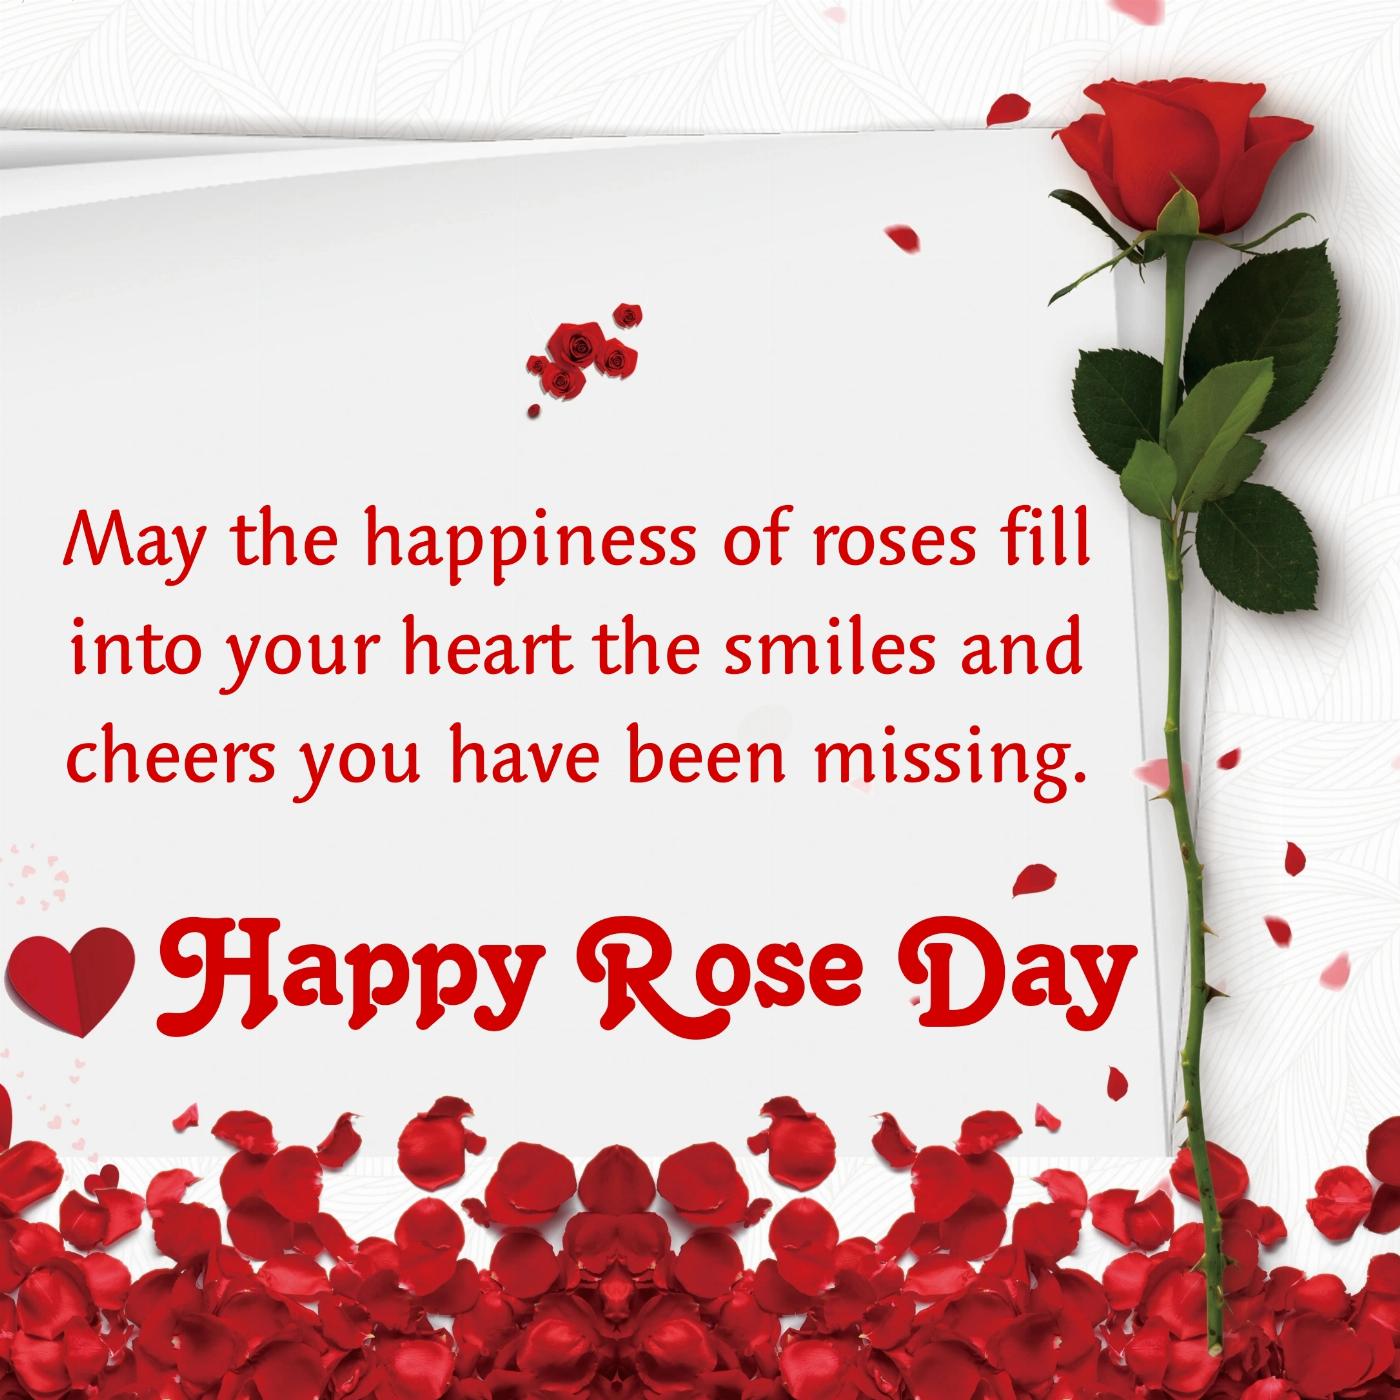 May the happiness of roses fill into your heart